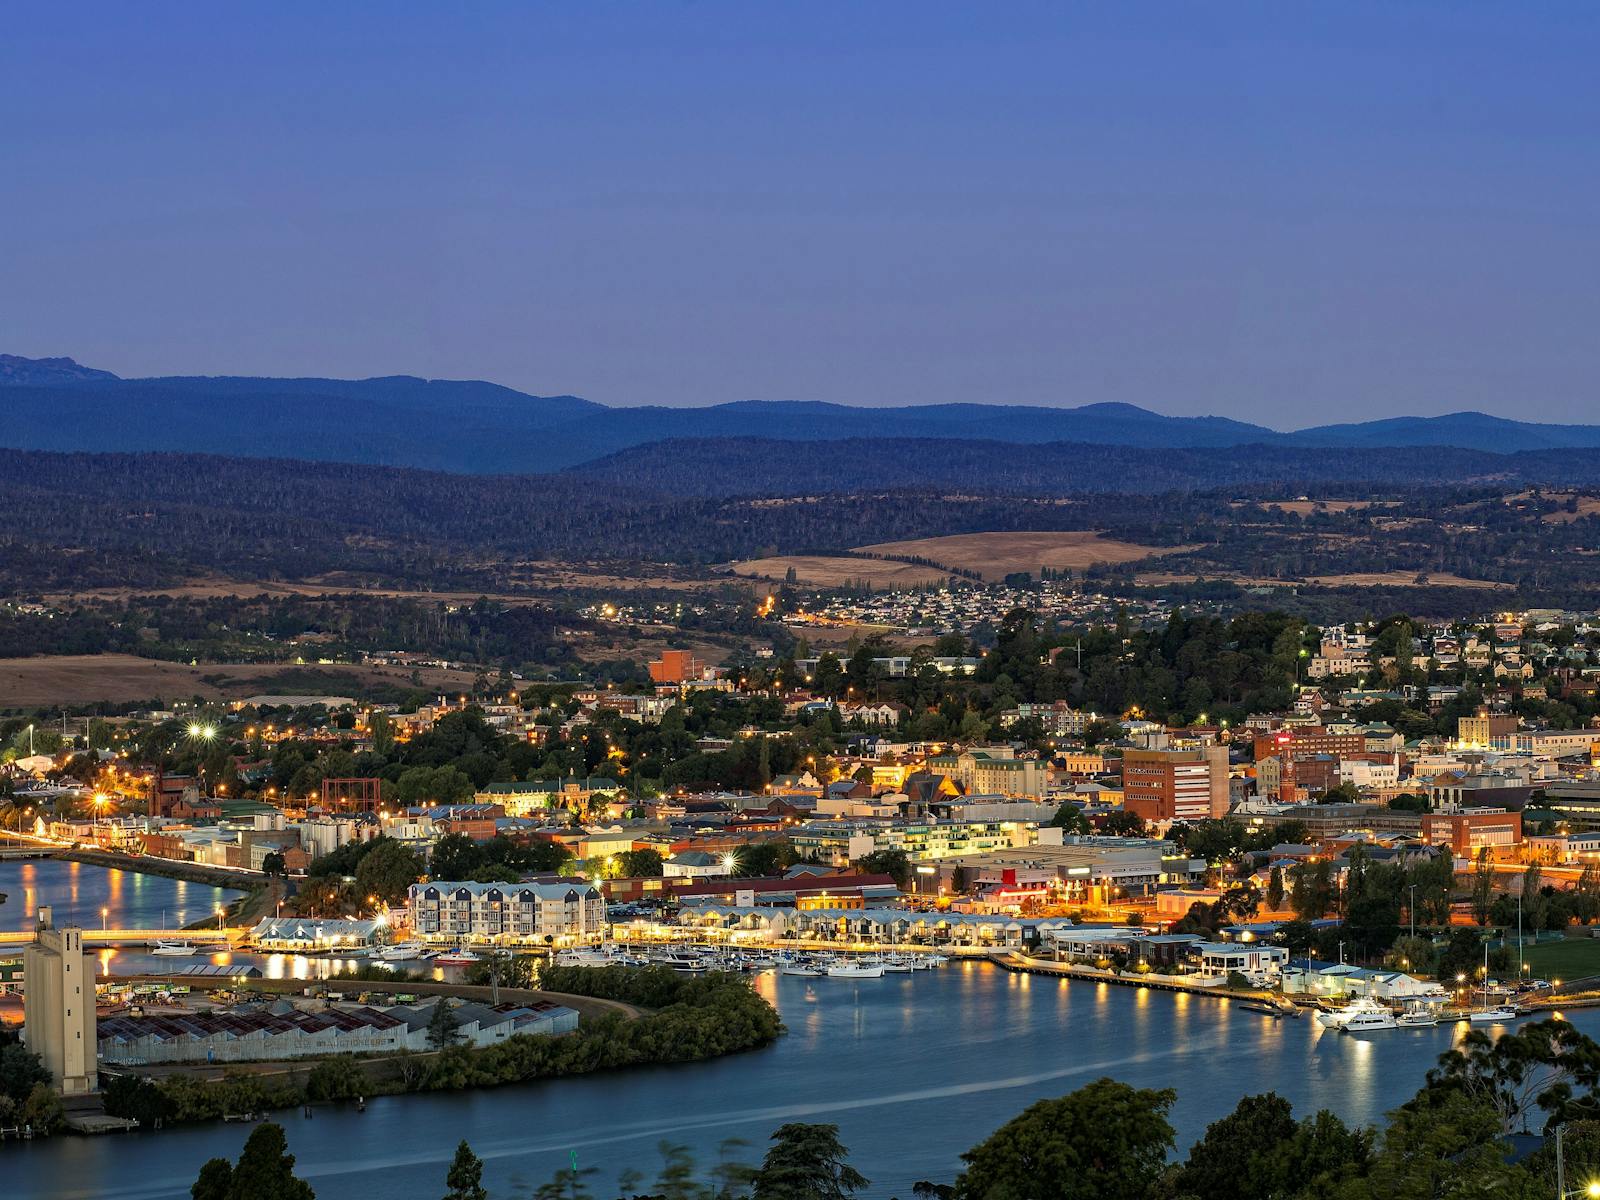 Launceston's setting, between the mountains of Northern Tasmania and its rivers.